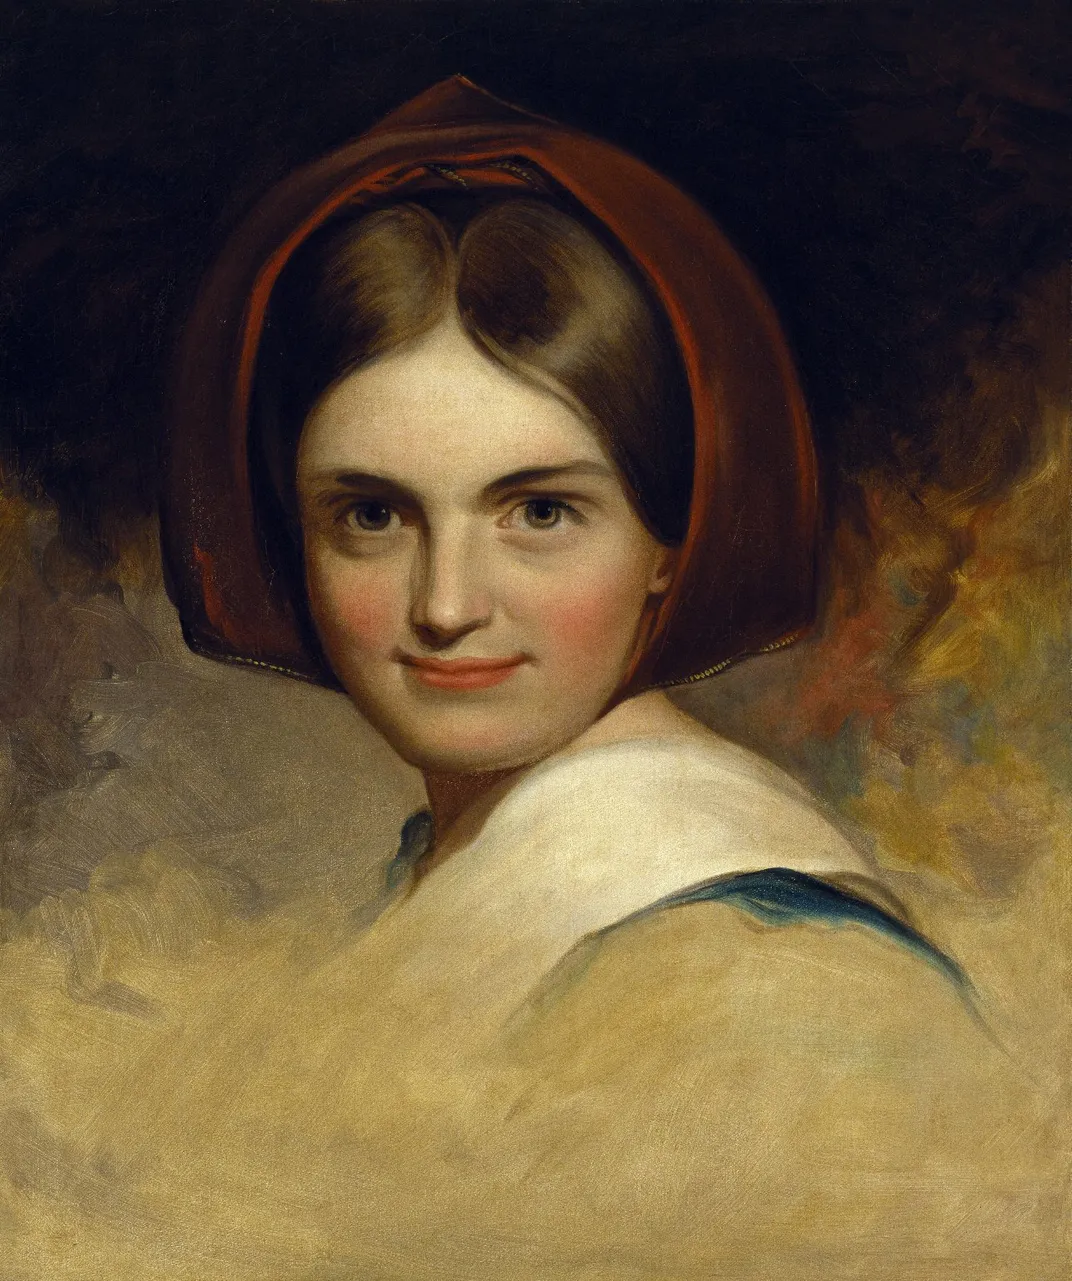 Unfinished portrait of Charlotte Cushman by Thomas Sully, 1843